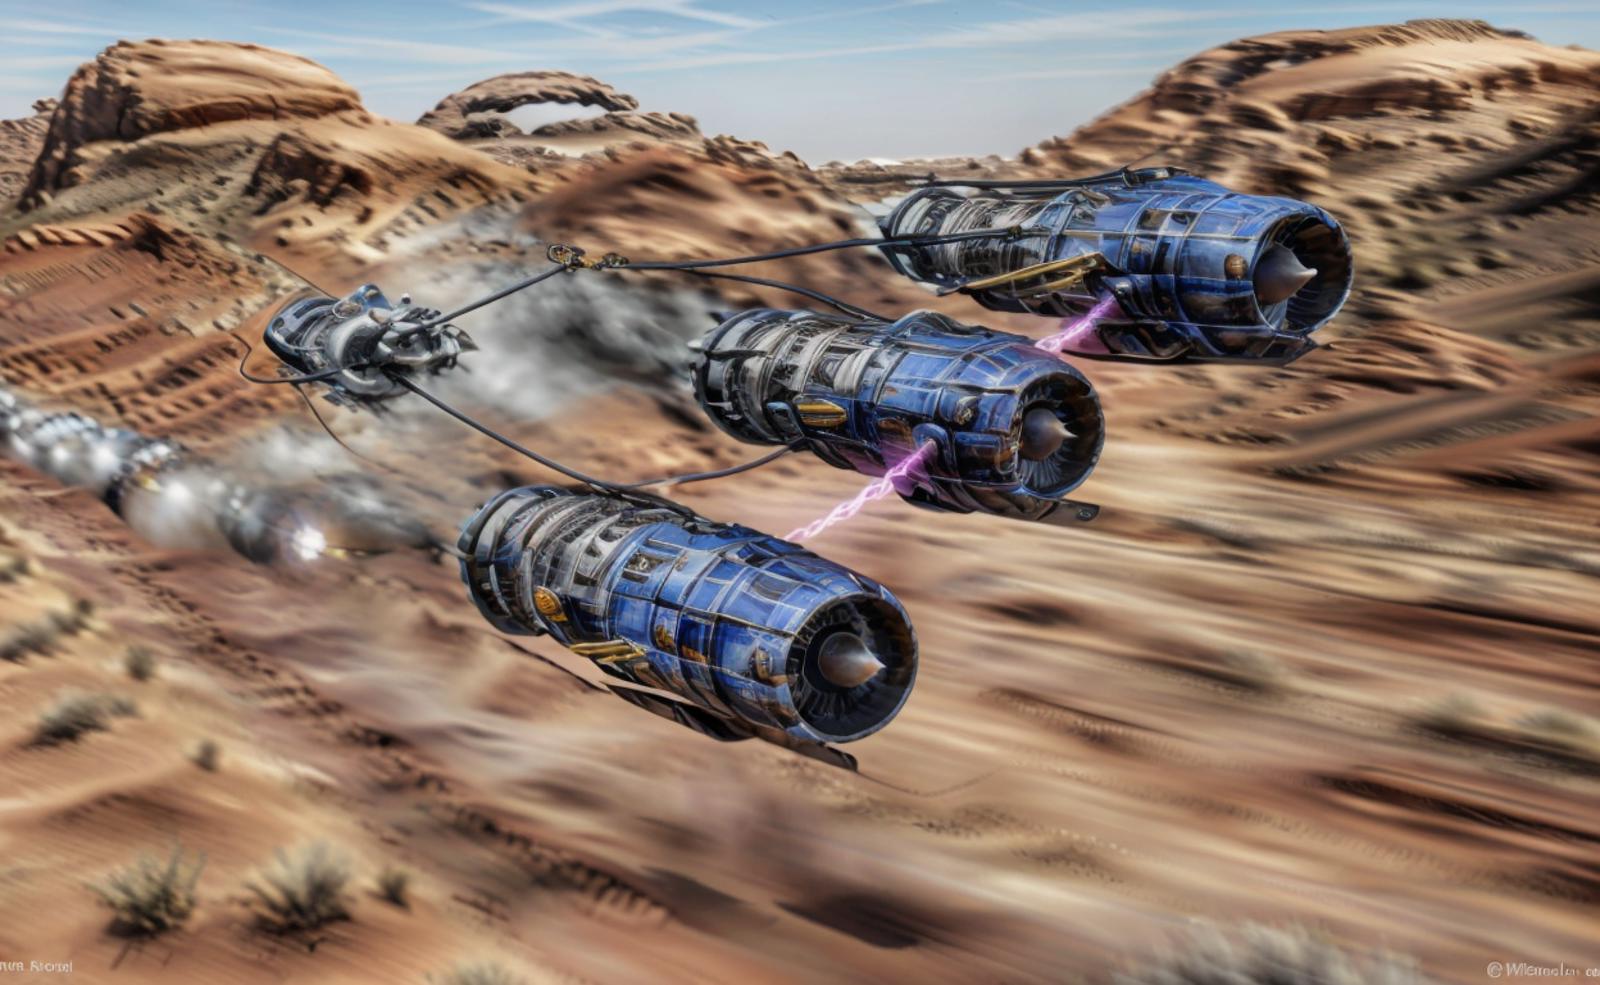 Now THIS is Podracing! image by echo_cipher